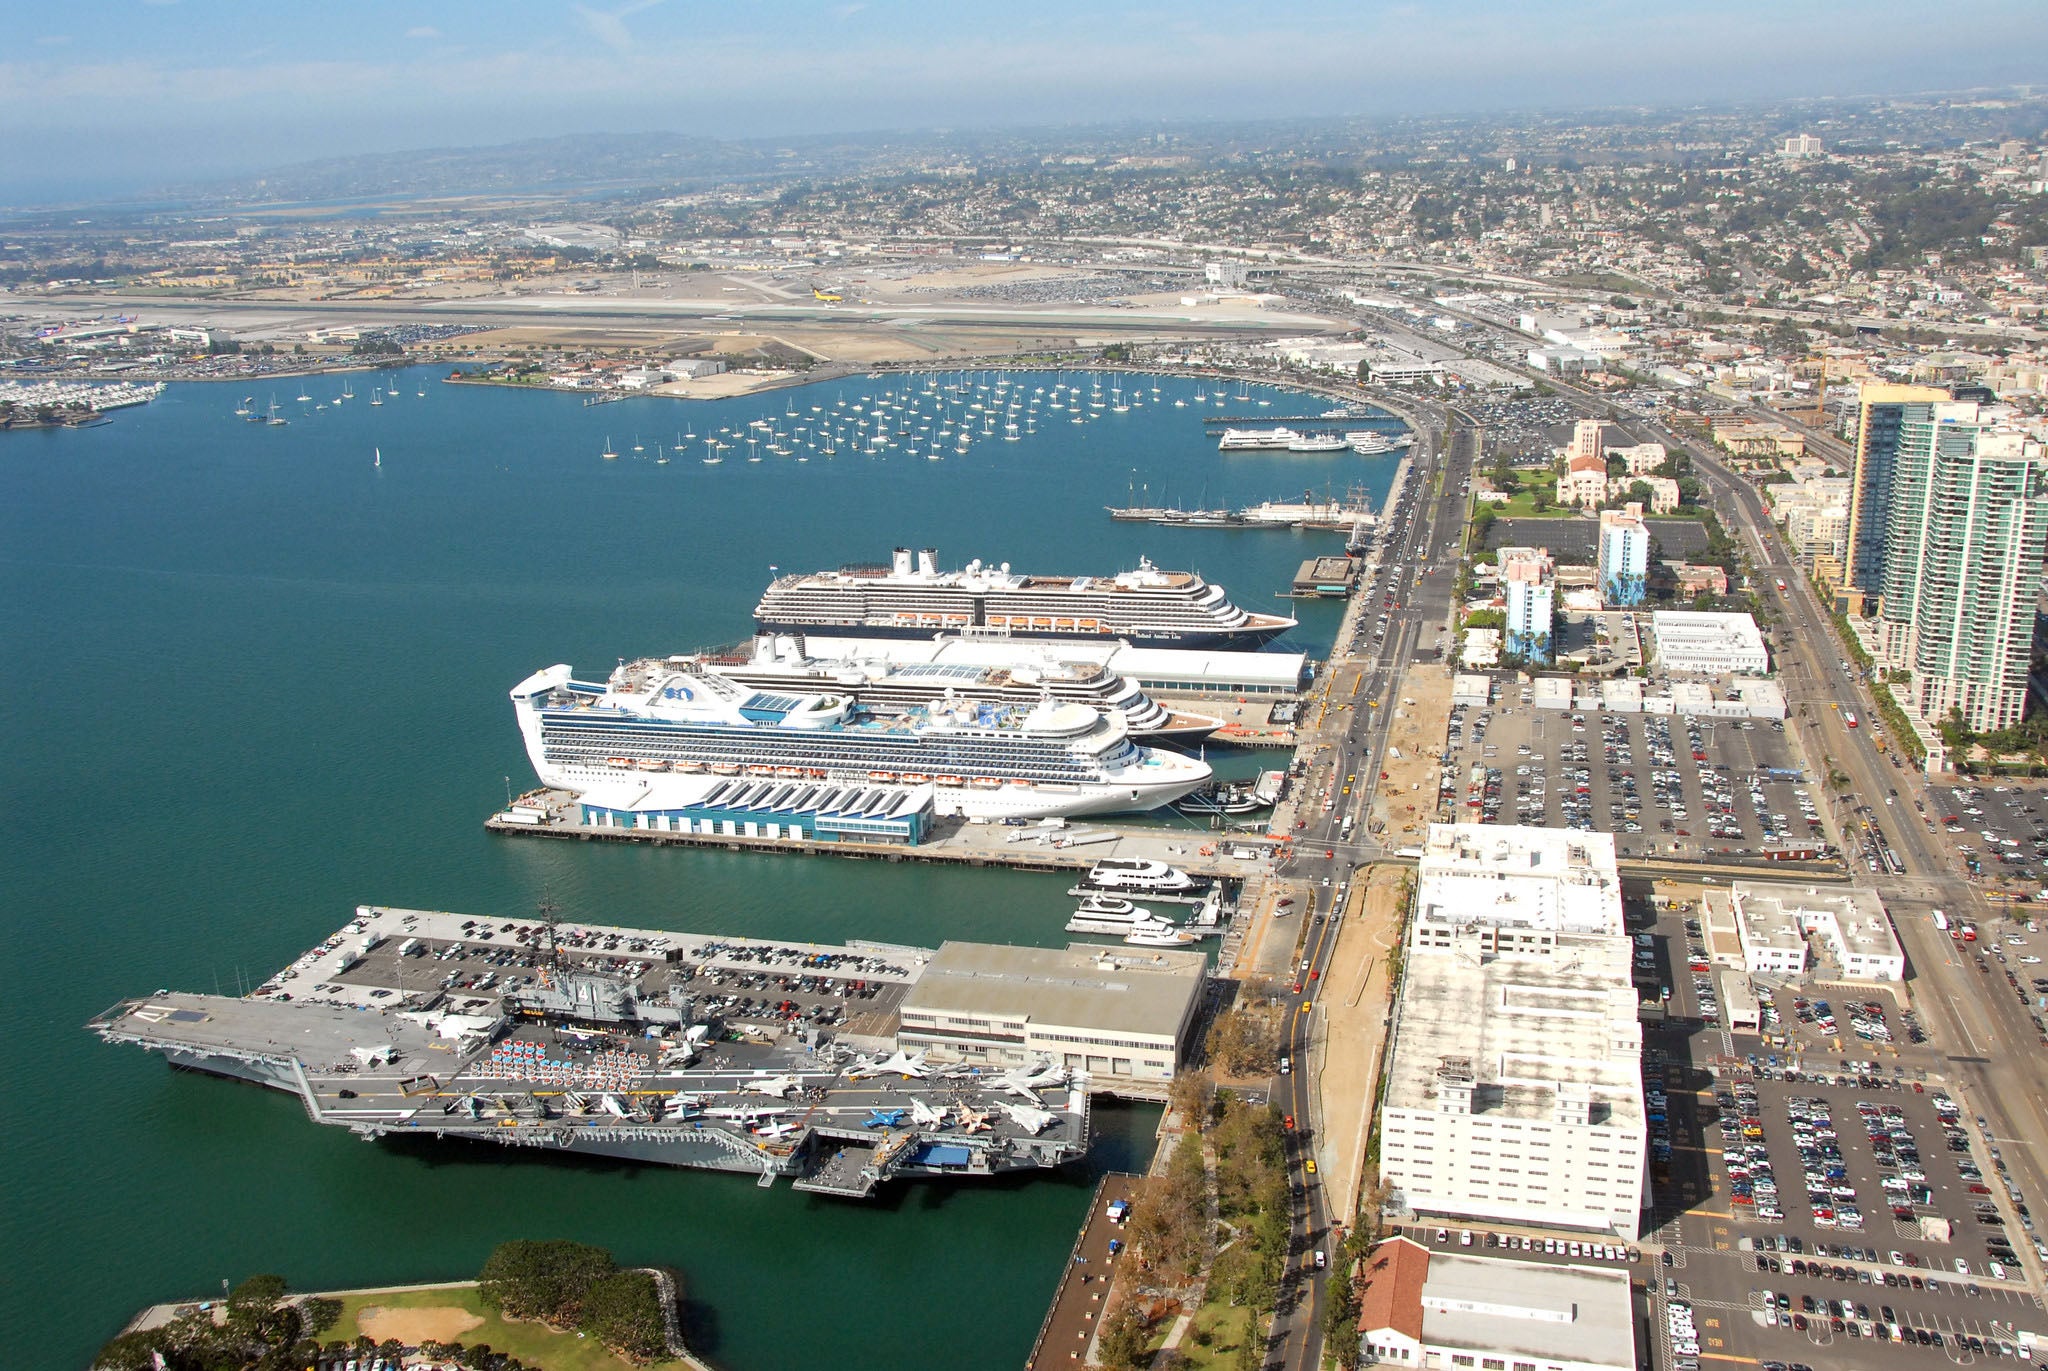 Aerial view of the Port of San Diego